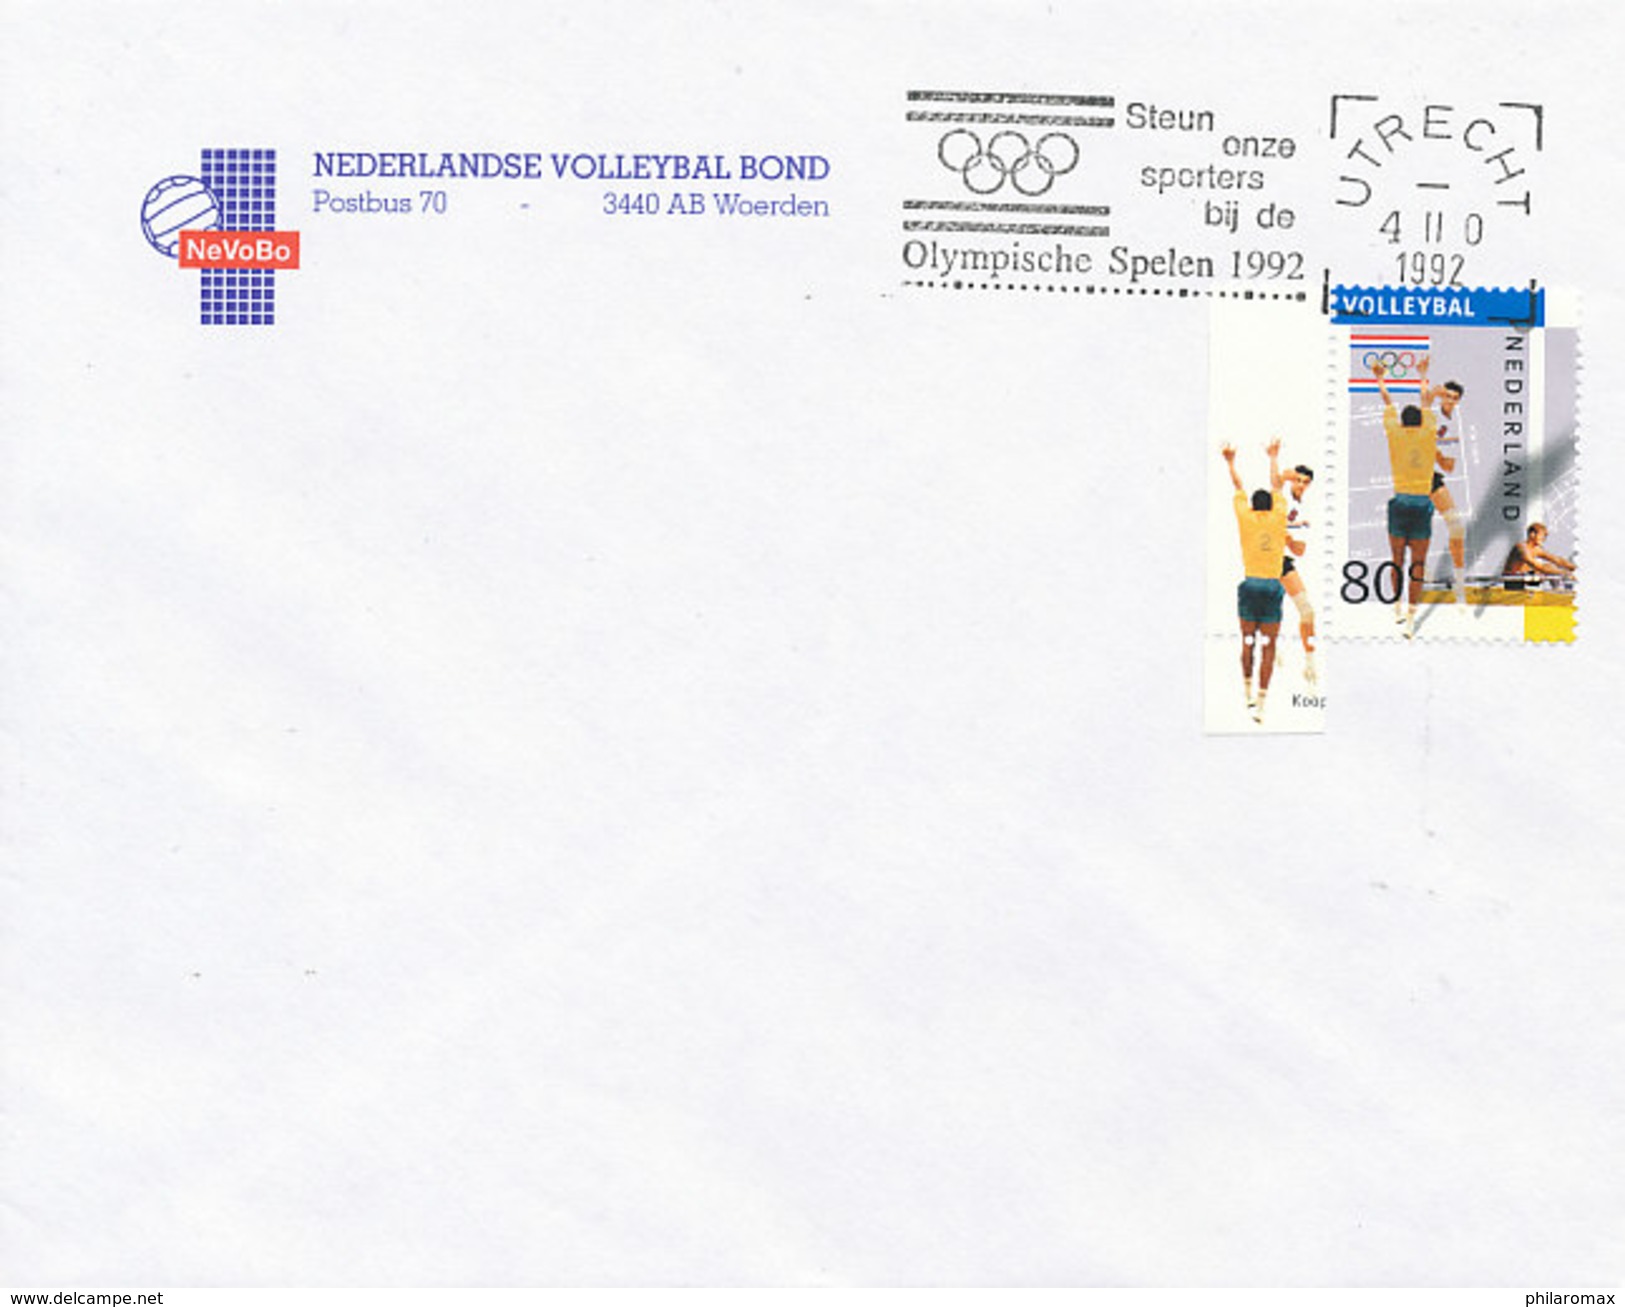 DC-0737 - 1992 NETHERLANDS - RR FDC VOLLEYBALL OLYMPICS - ORIGINAL COVER NEVOBO - VOLLEYBALL ORGANIZATION - Volley-Ball